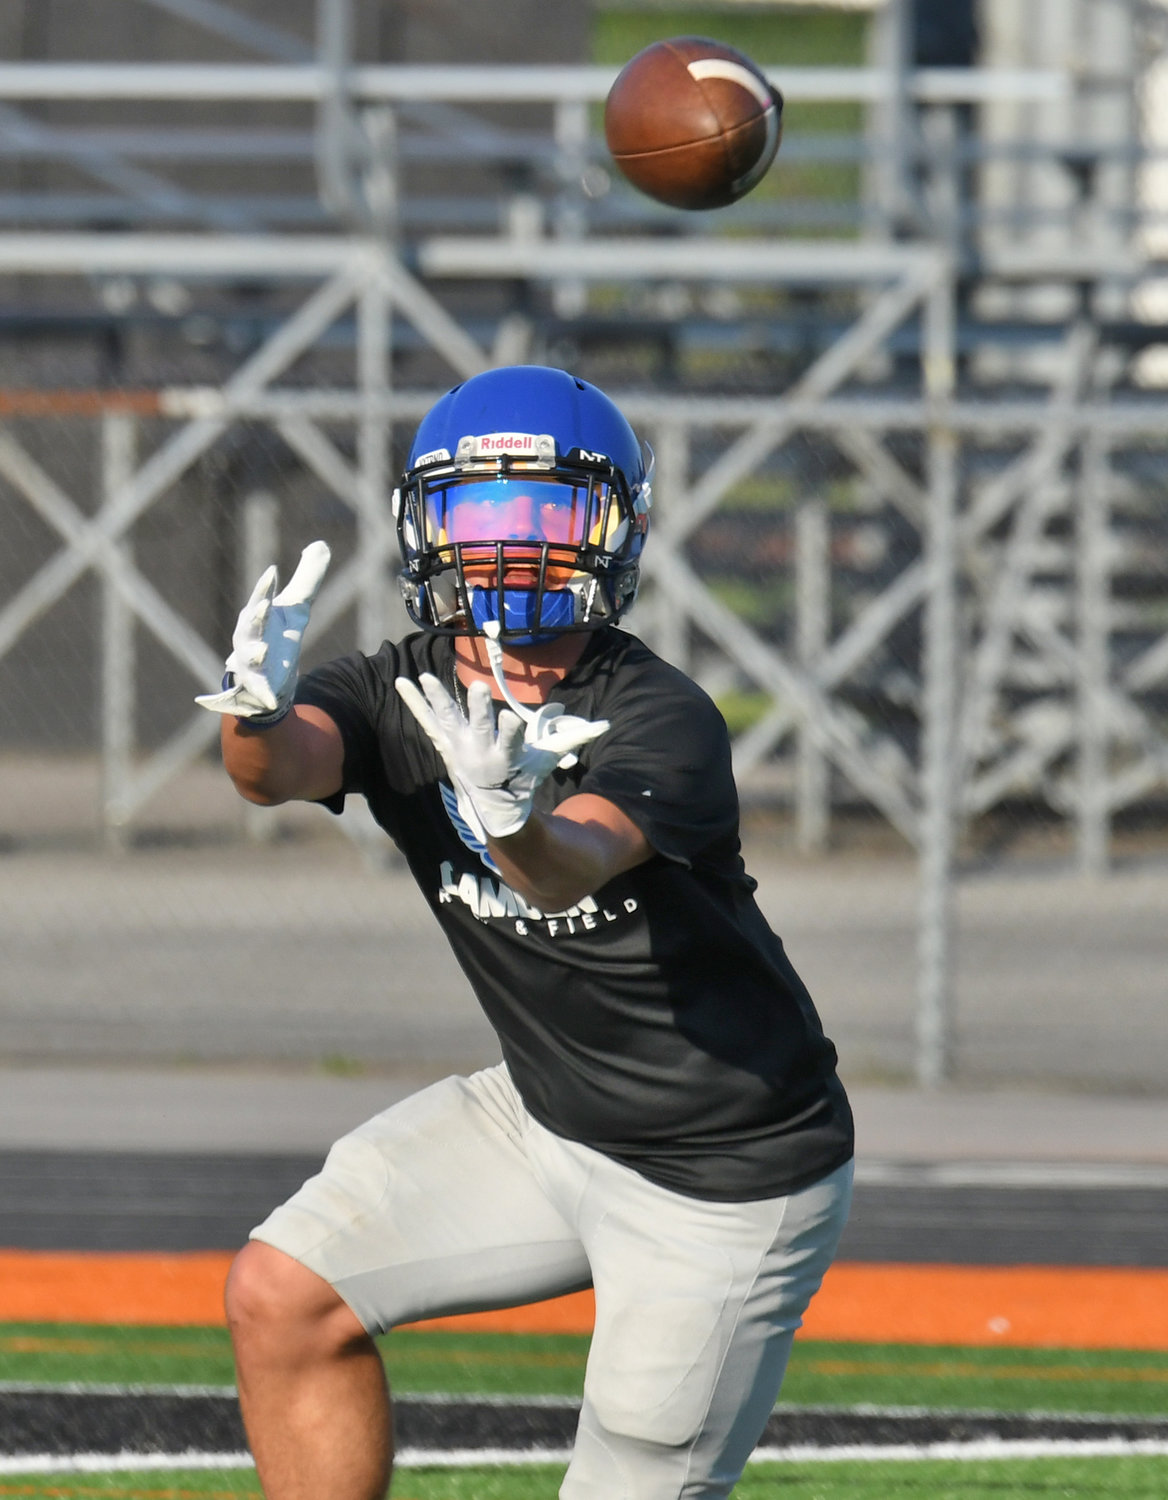 Camden senior receiver Robby Jackson watches the ball into his hands during a seven-on-seven scrimmage against Rome Free Academy.